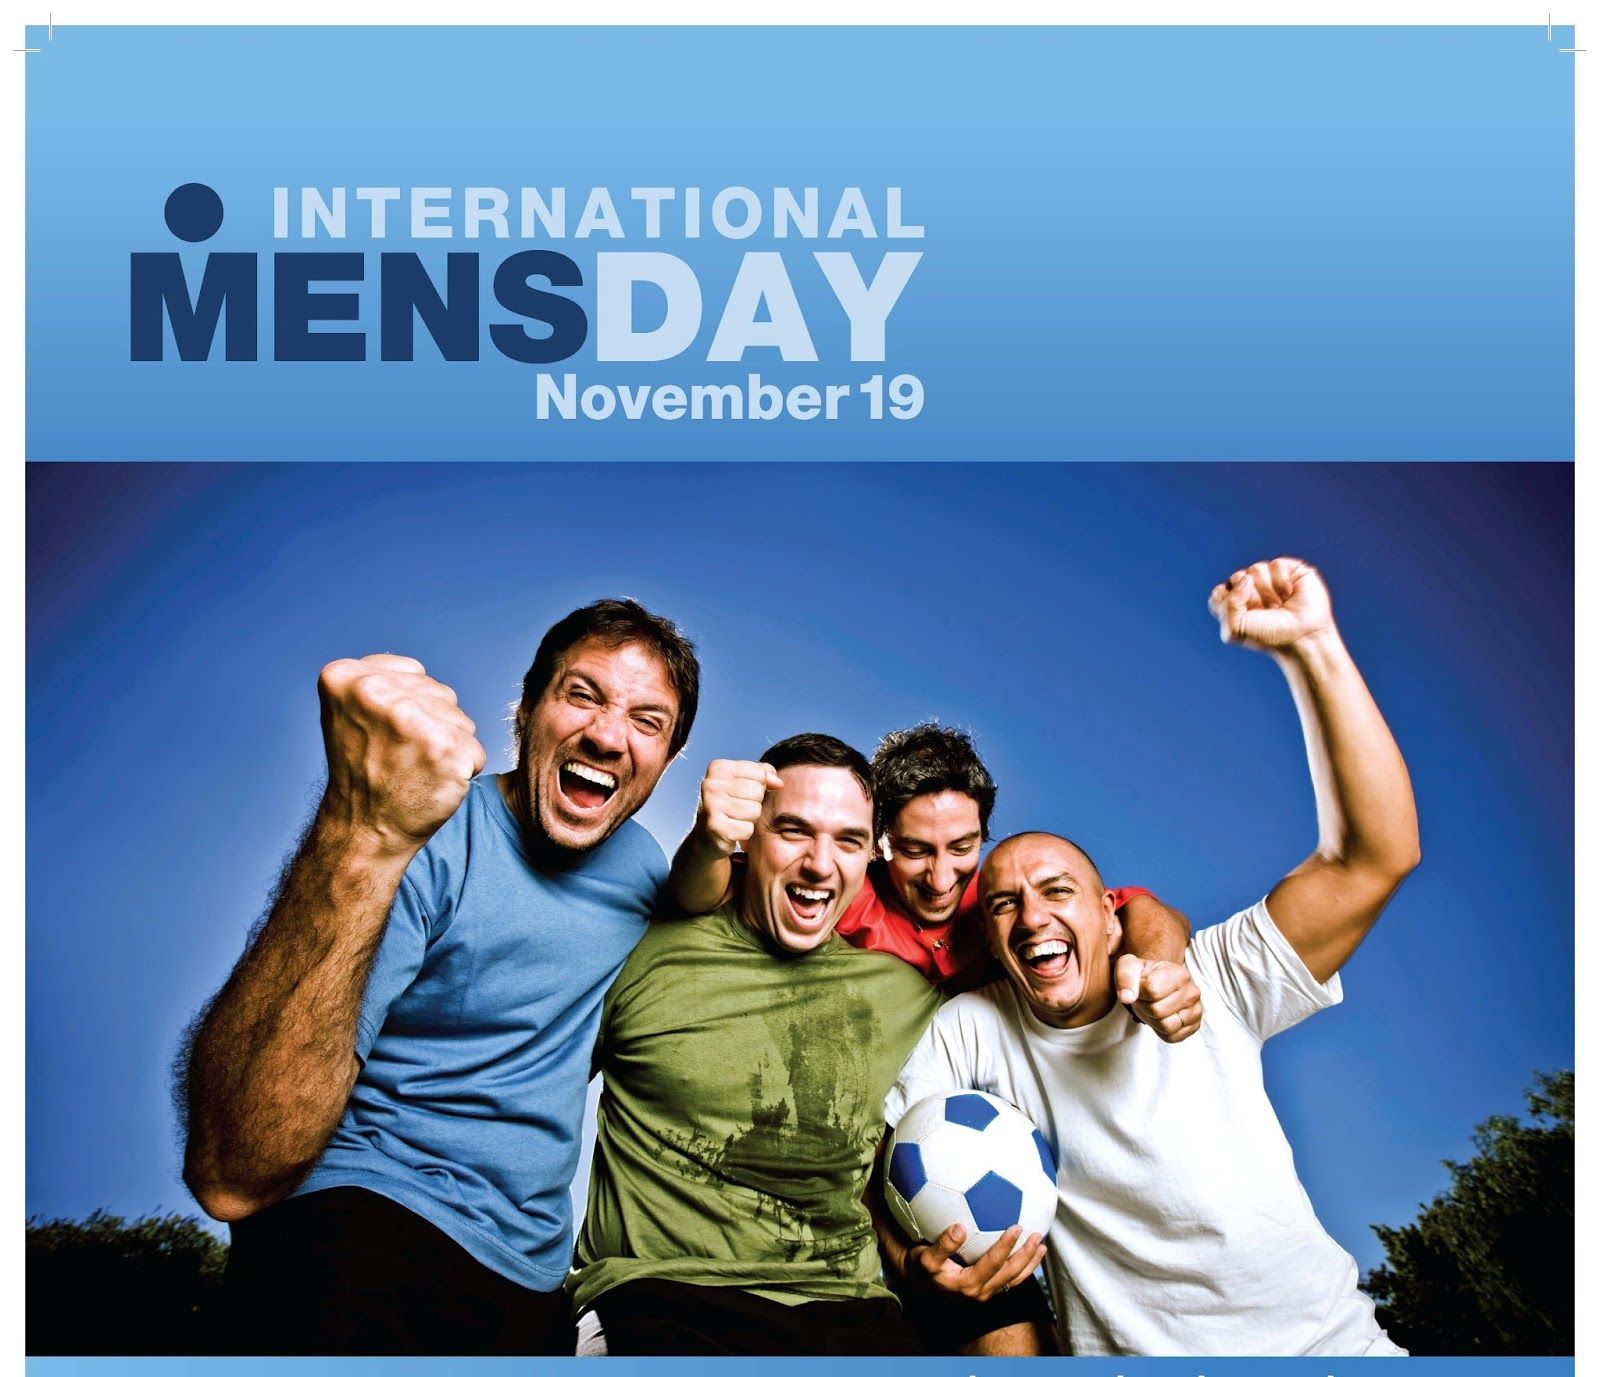 Happy*} International Men's day 2014 wallpaper, image, picture and quotes>> 40 ATB Theme